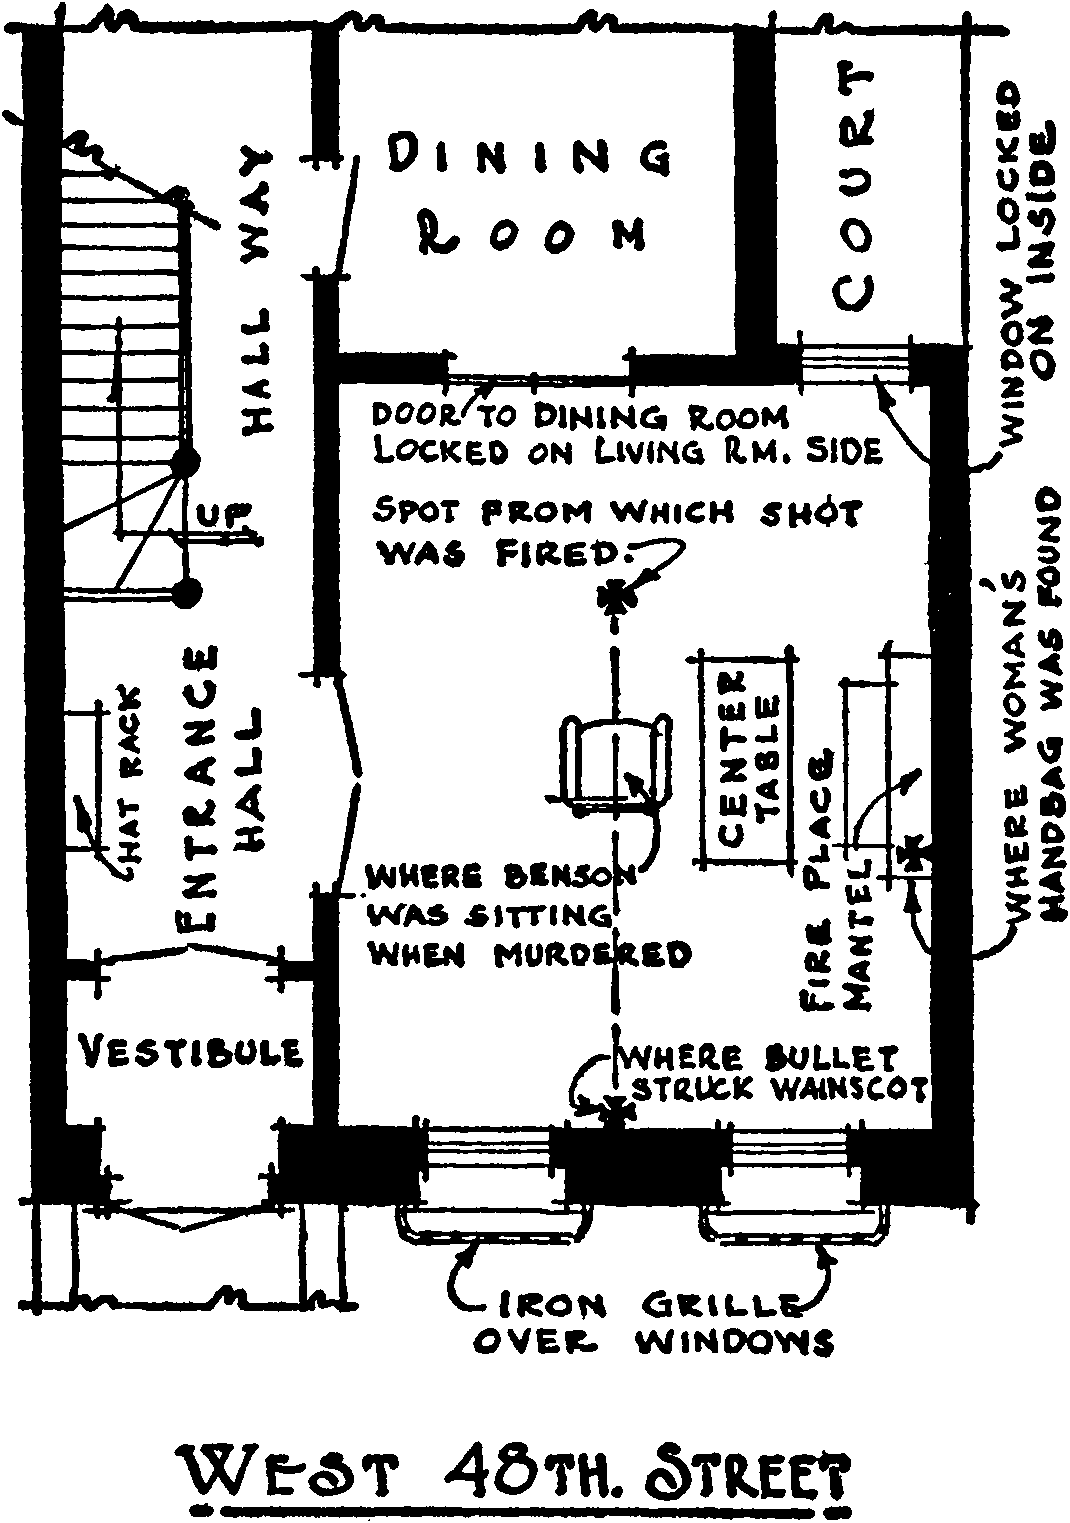 The plan of the ground floor of     an apartment in West Forty-eighth Street. The front door is in the     southwest corner of the building, and opens onto a vestibule,     beyond which the entrance hall runs along the west side of the     building. Near the end of the hall are stairs to the upper floor     and a door to the dining-room. Halfway along the hall, double     doors on the eastern side open into a living-room, which occupies     most of the ground floor. Windows on the south wall have iron     grilles over them. A window on the north wall is locked on the     inside. Double doors on the north wall also lead into the     dining-room. In the middle of the living-room is a chair facing     north, which is labeled “Where Benson was sitting when murdered.”     A mark north of the chair is labeled “Spot from which shot was     fired,” and from this mark a line runs due south, ending at the     south wall, at a spot between the windows, labeled “Where bullet     struck wainscot.” On the east wall is a fireplace, and a spot on     the mantel is labeled “Where woman’s handbag was found.”